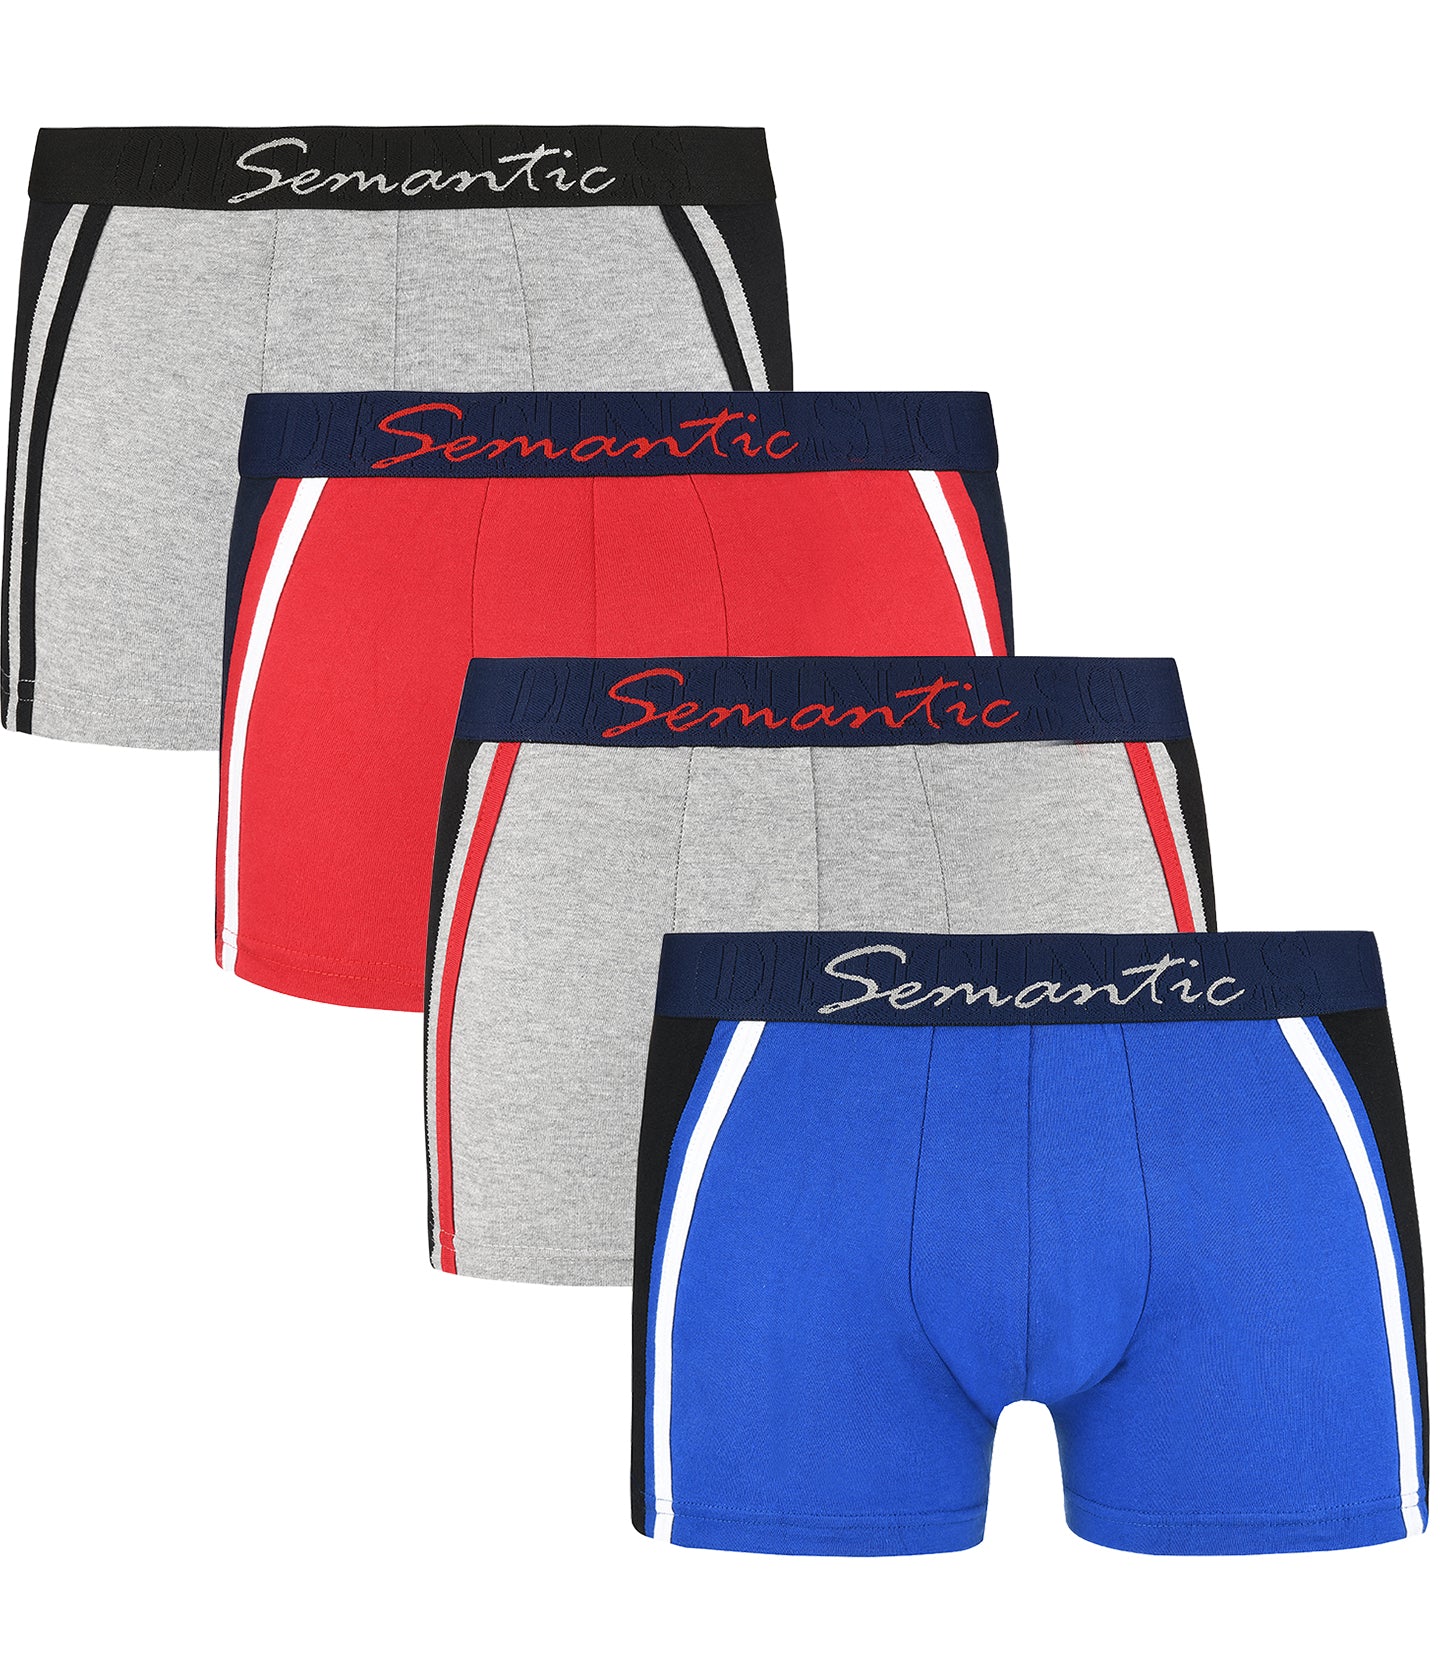 Semantic Cotton Trunks - Side Cut-n-Sew (Pack of 4)